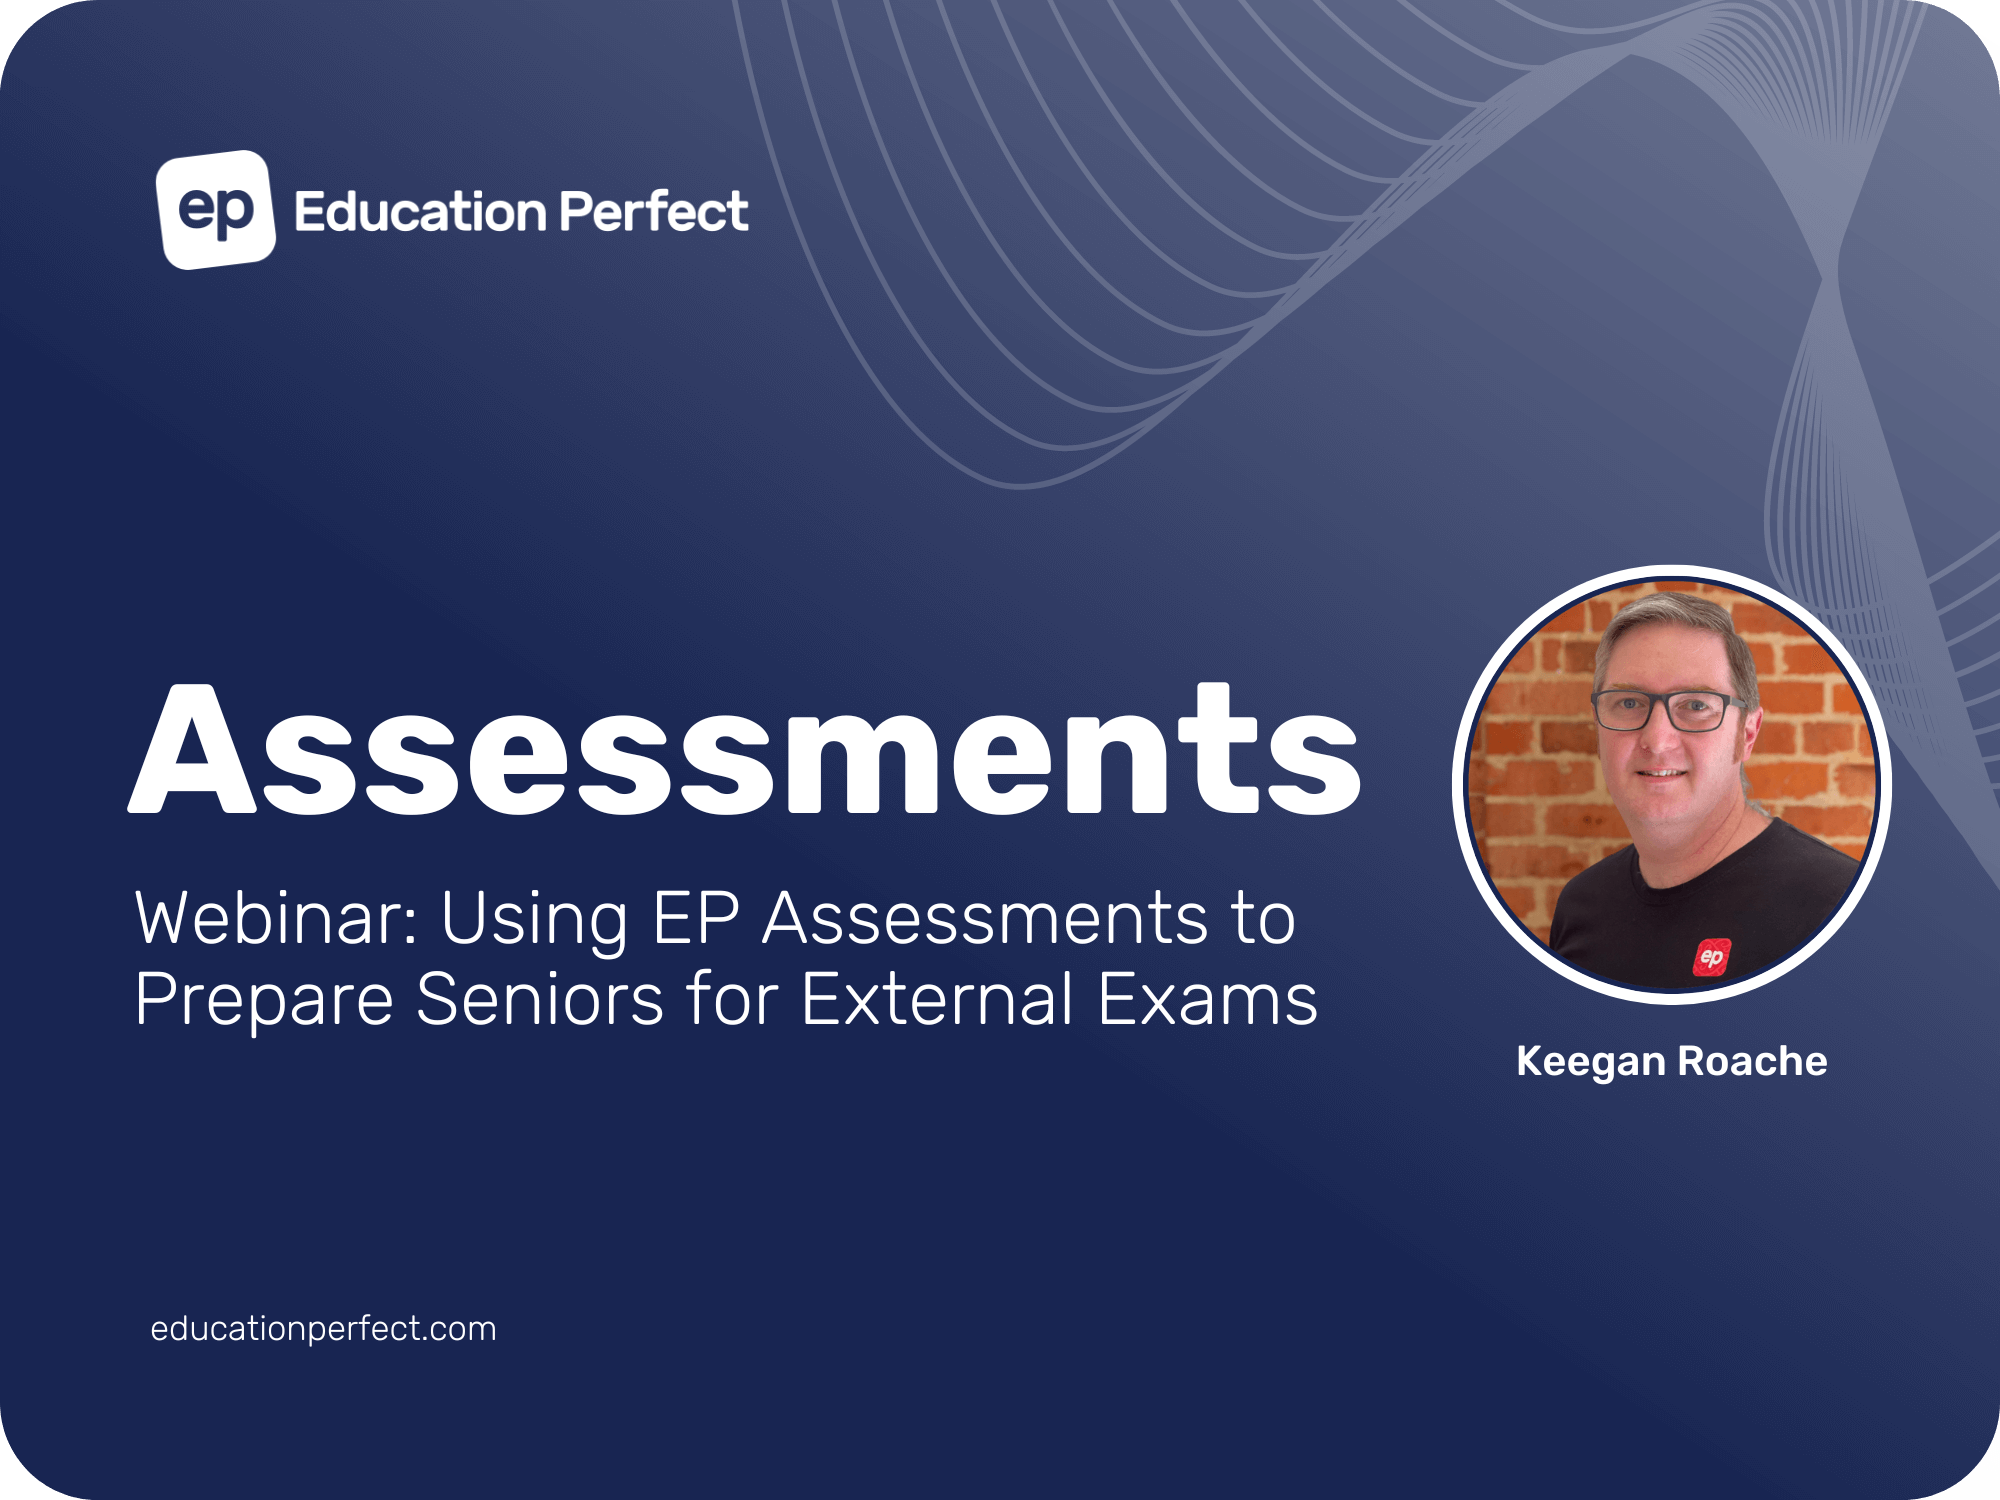 Using EP Assessments to Prepare Seniors for External Exams